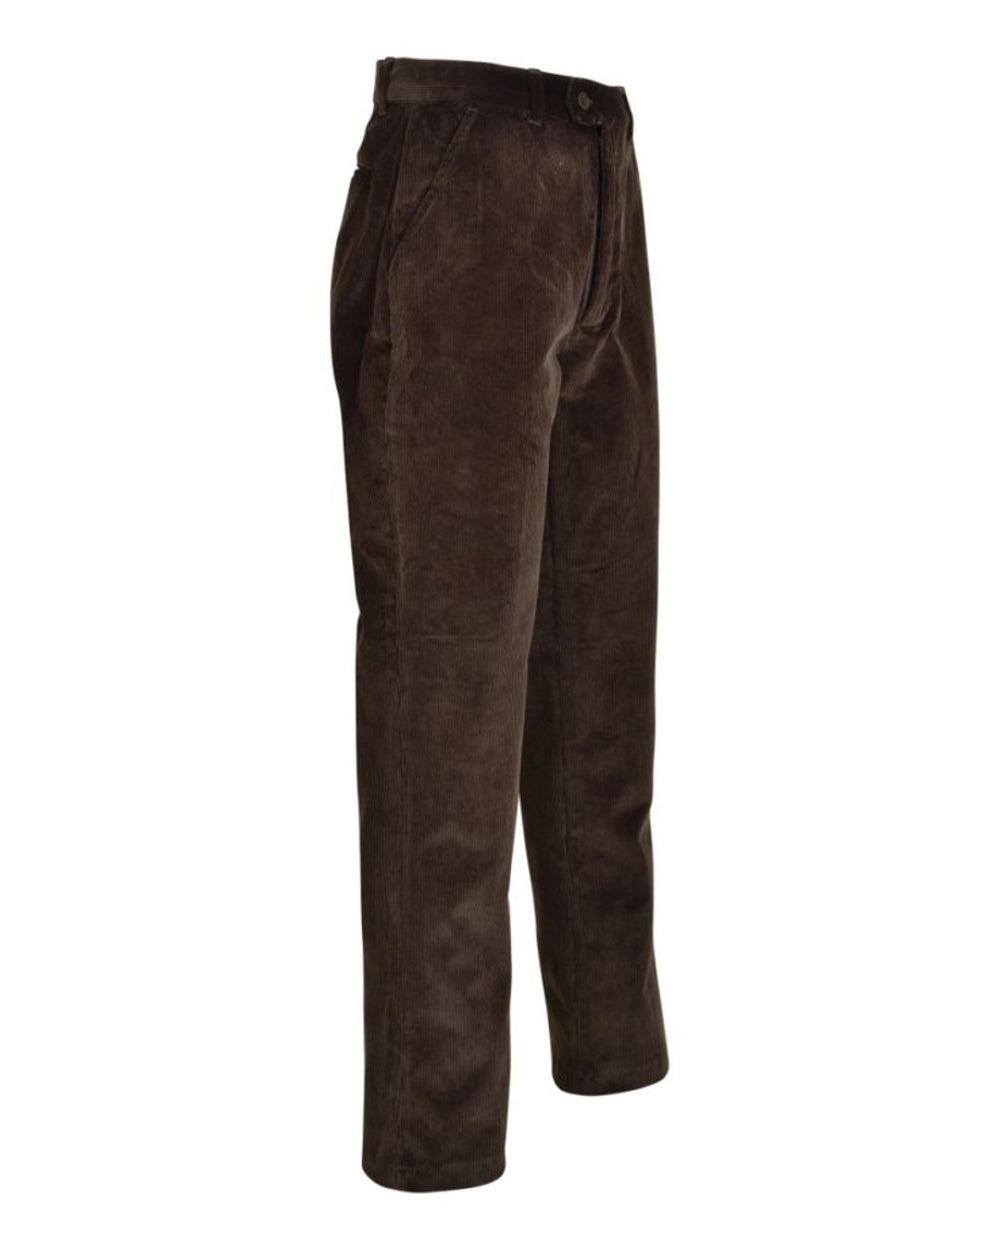 Percussion Country Corduroy Trousers in Brown